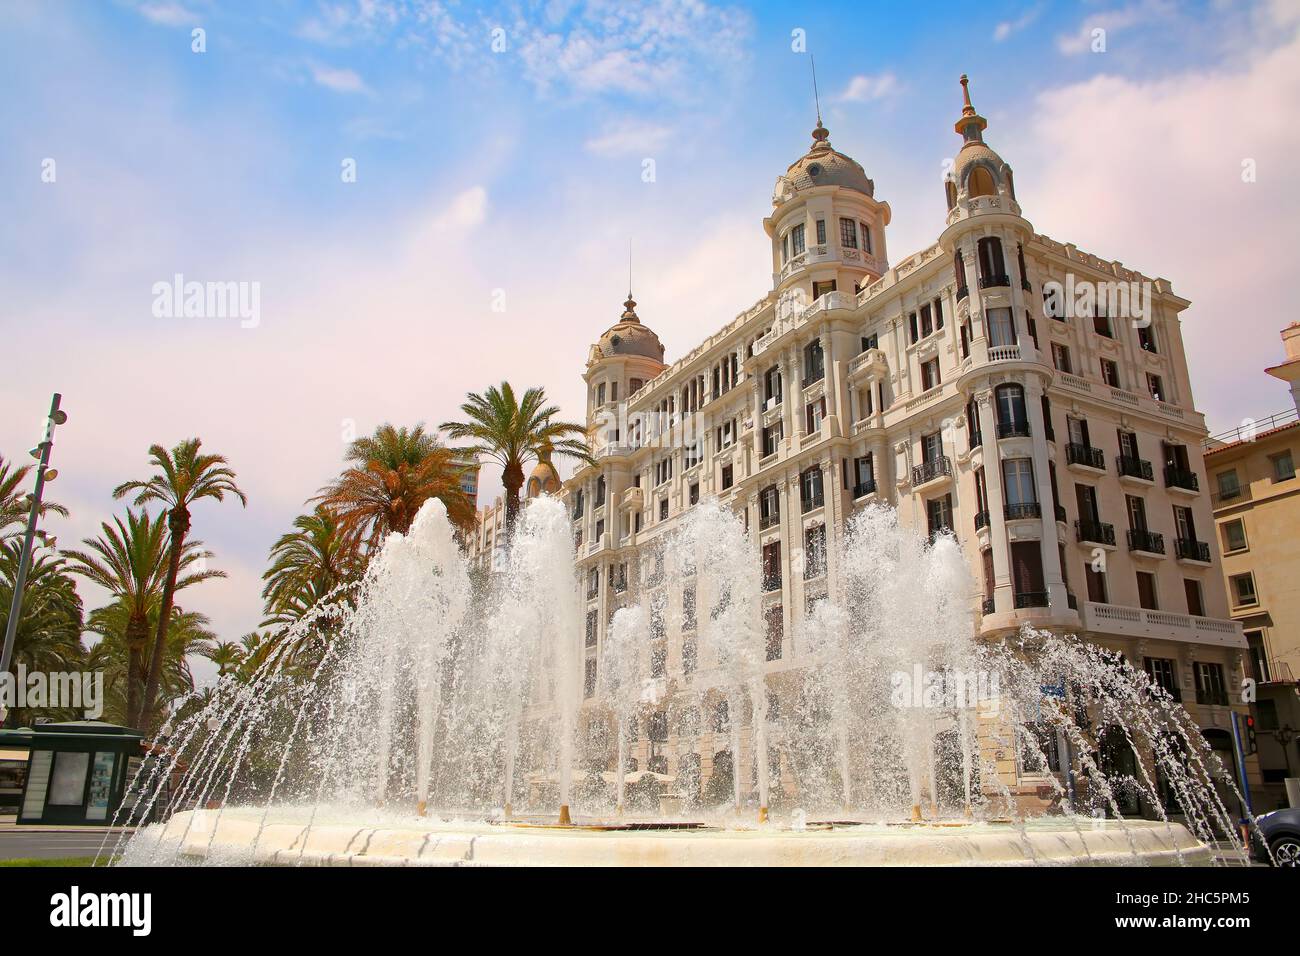 Beautiful water fountain along the waterfront of the city with historic traditional buildings. Explanada de Espana with palm trees, Alicante, Spain. Stock Photo